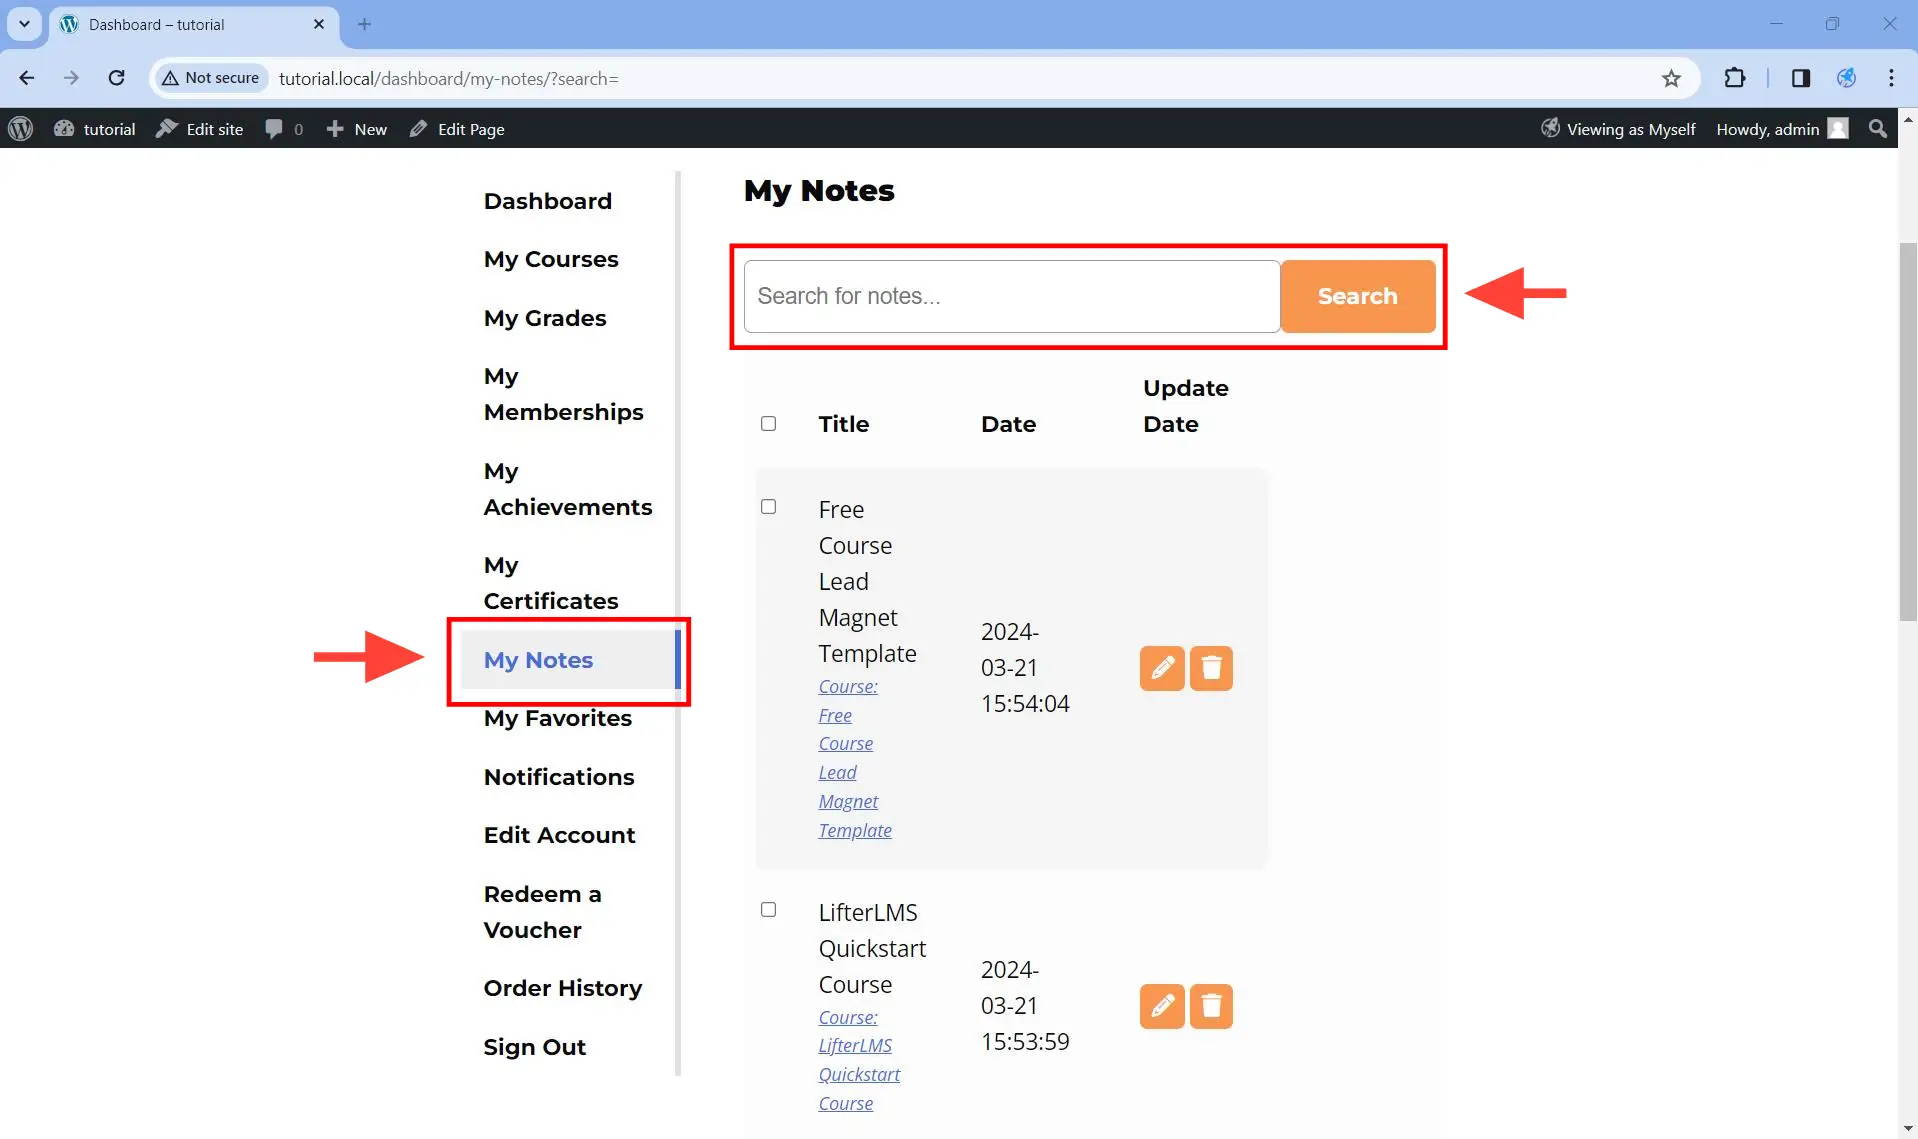 Nagivate to the My Notes section of the student dashboard page and locate the Search for notes... field.